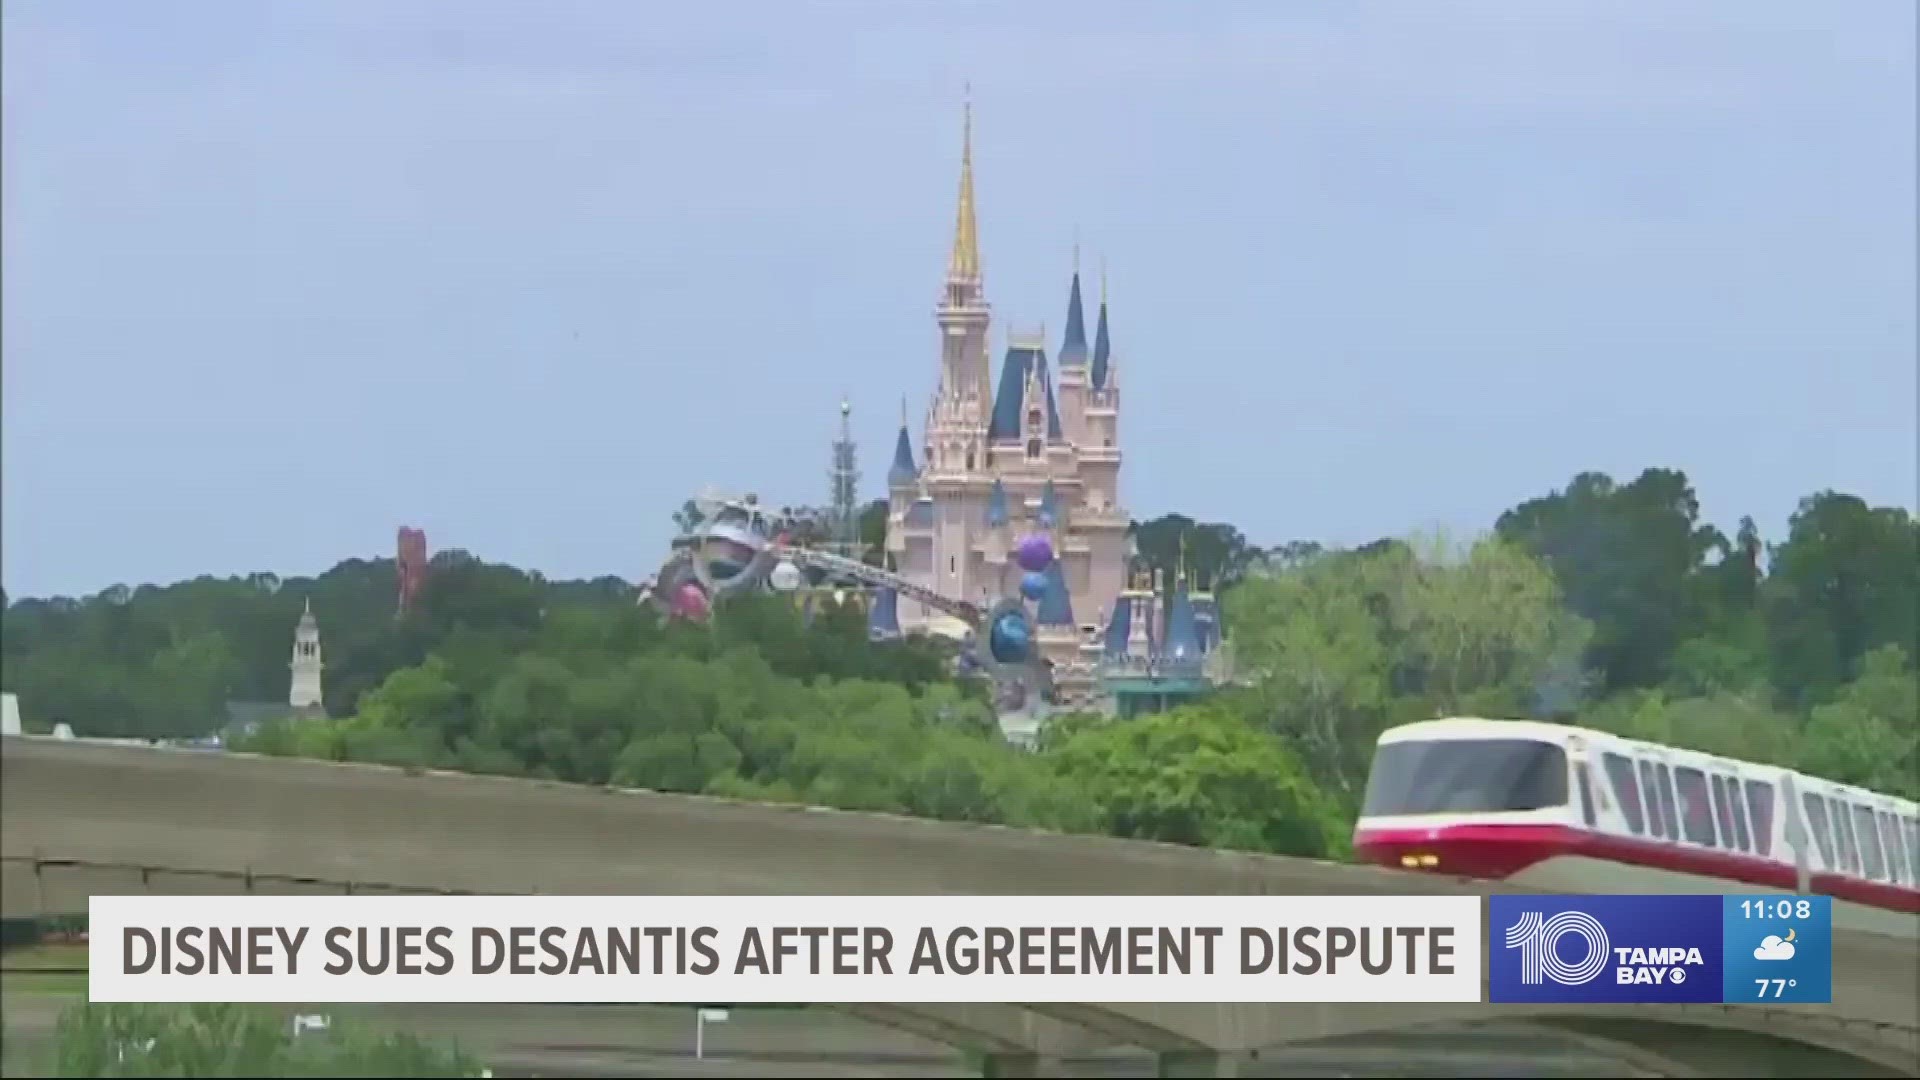 The suit was filed minutes after a Disney World oversight board appointed by DeSantis voted to void a deal that placed theme park decisions in the company's hands.